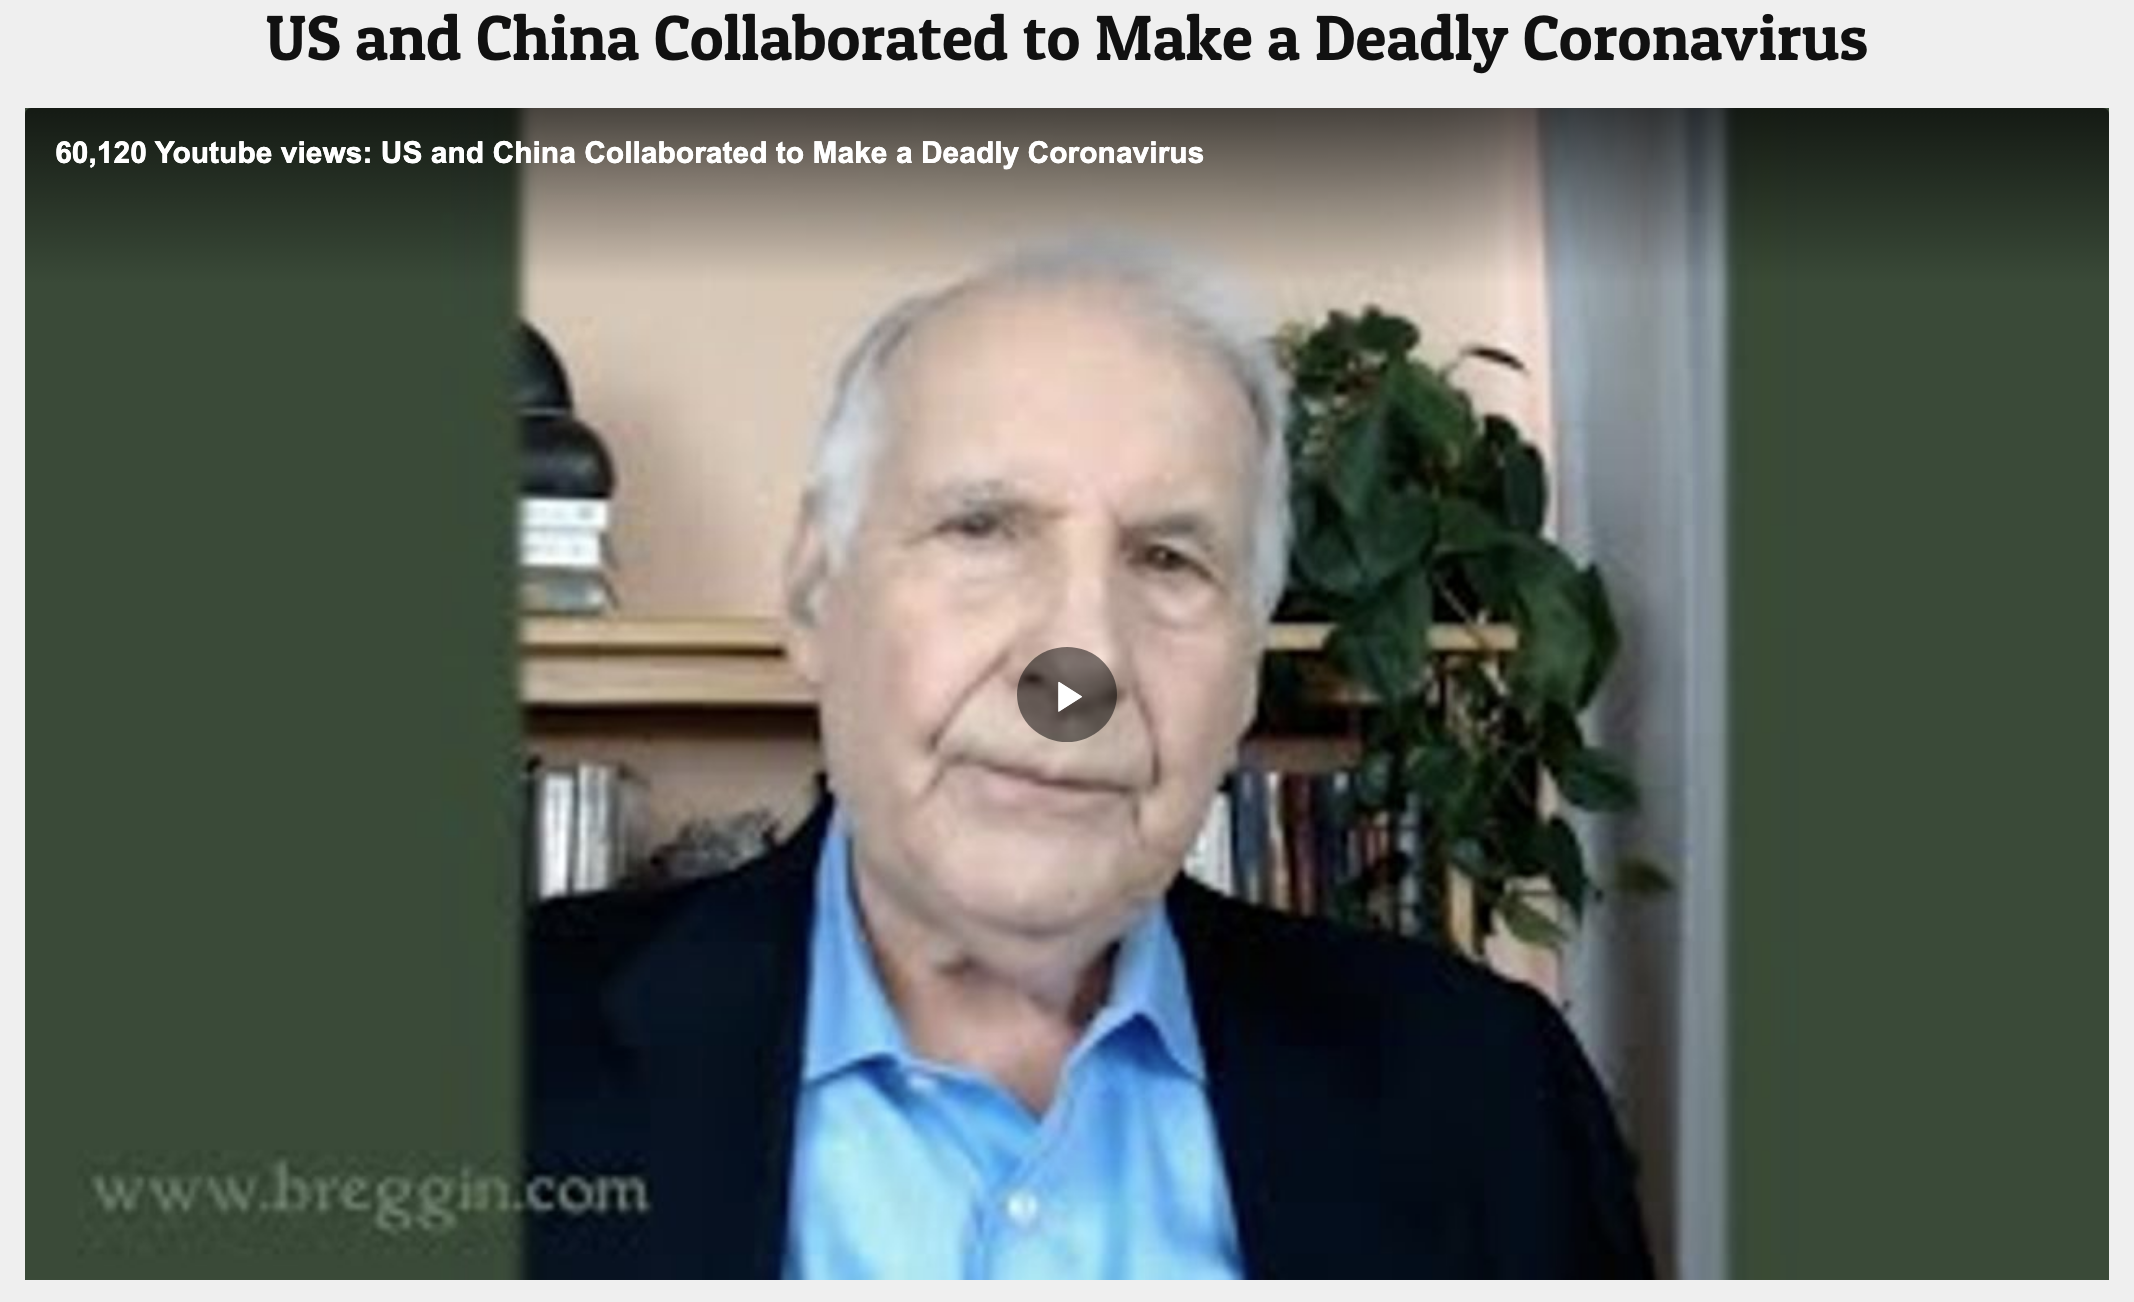 Screenshot of video from US and China Collaborated to make deadly Coronavirus